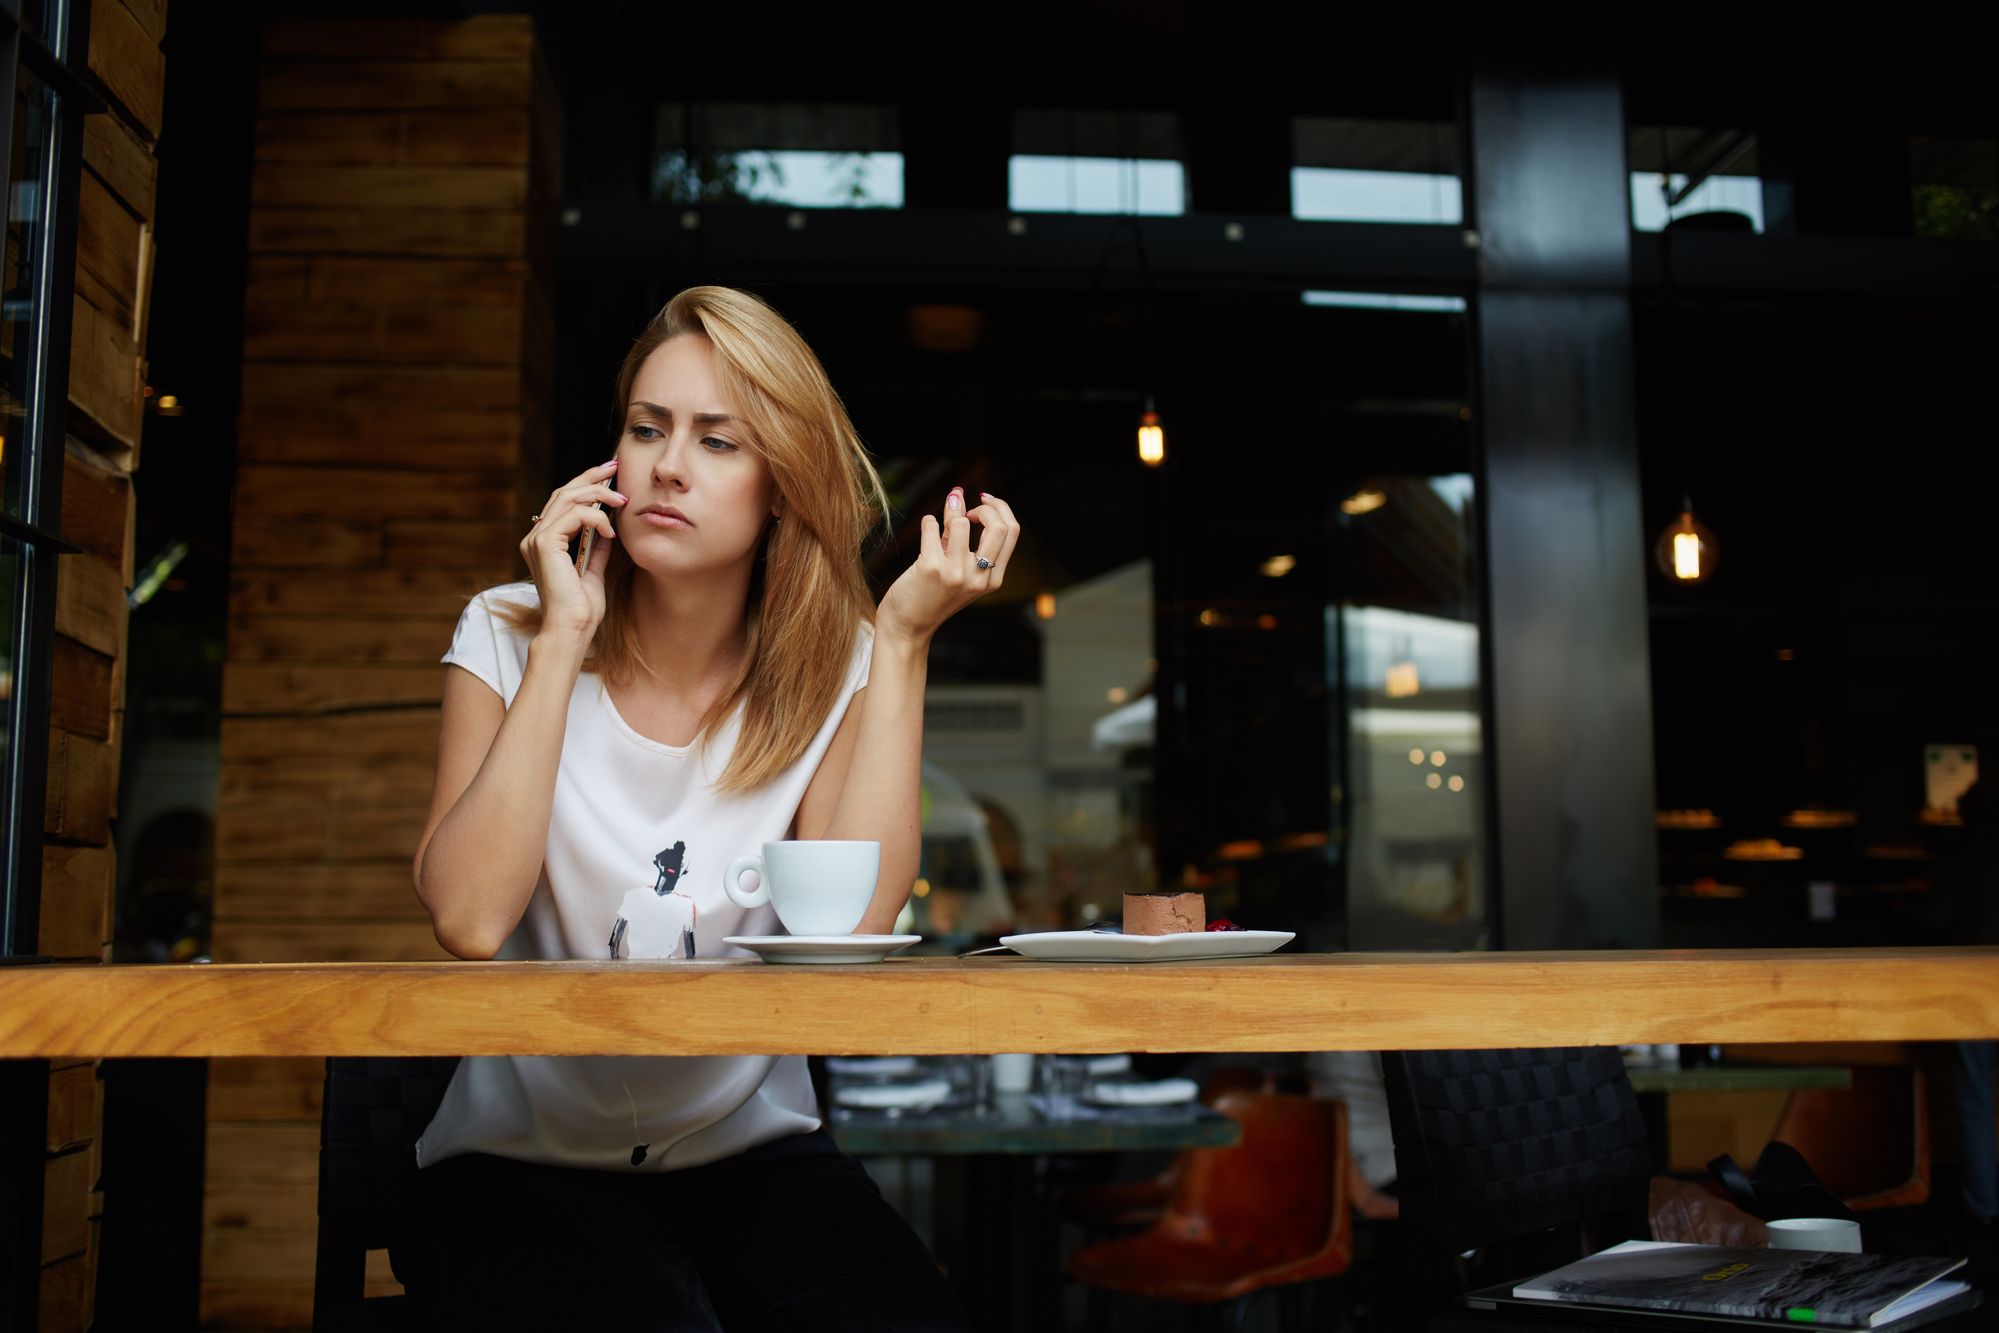 Young upset woman student talking on mobile phone while relaxing in cafe after lectures in University, concerned female have a bad conversation on cell telephone while sitting alone in coffee shop